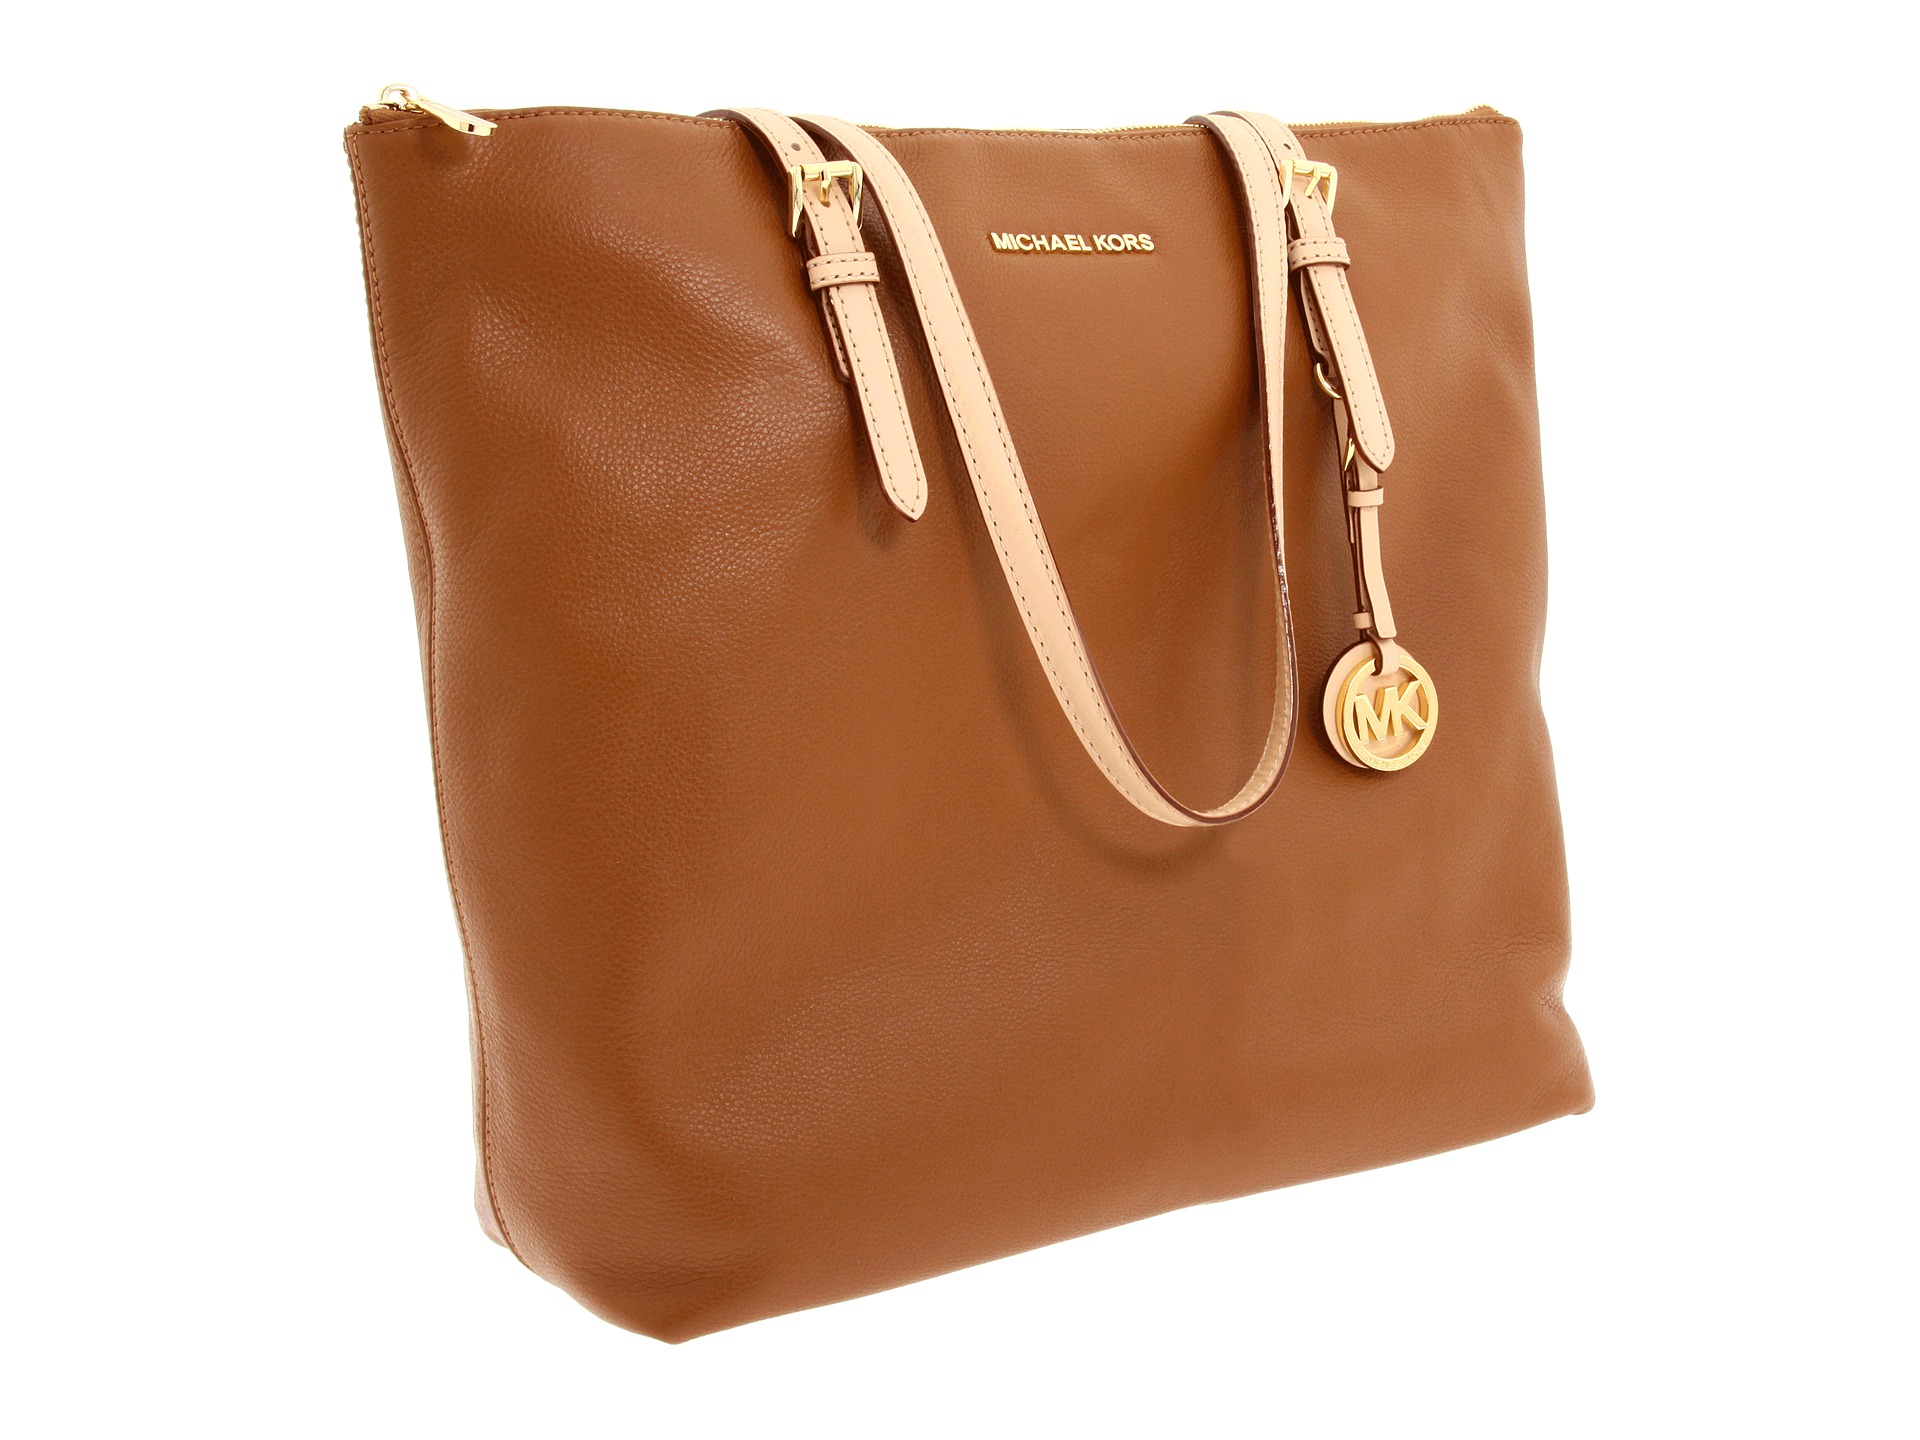 MICHAEL Michael Kors Jet Set Large North/South Tote $258.00 Rated 4 